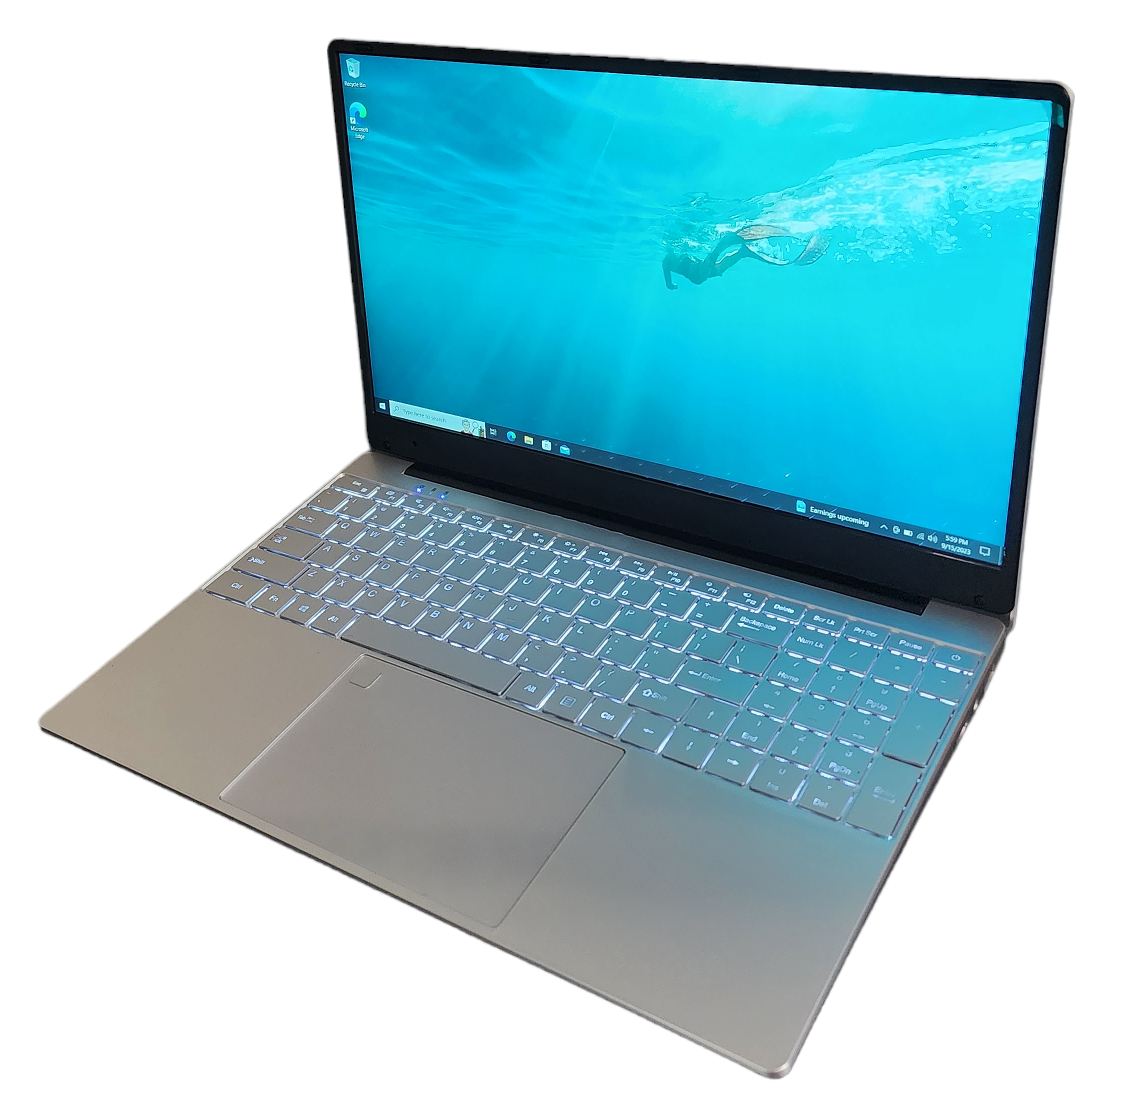 Refurbished A+ Laptop 15.6" for School, Business, and Gaming with Fast Quad Core Intel (2.7GHz), 8GB RAM, 128GB SSD Storage, Backlit keyboard, HDMI, Camera, Bluetooth, HD Speakers, Fast USB 3.0, Windows 11 Pro